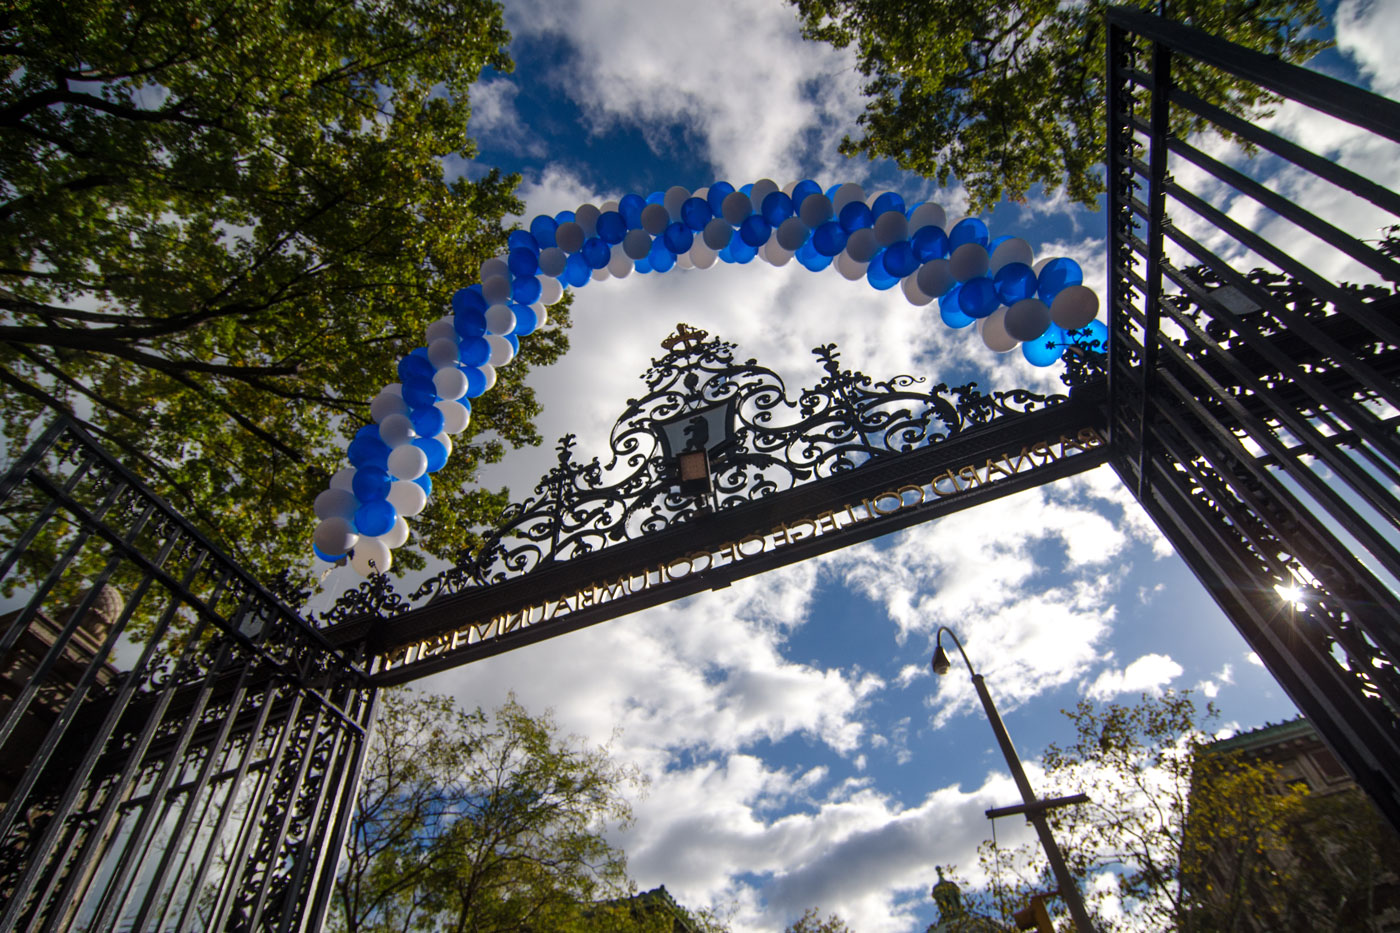 Barnard gate arch covered in white and blue balloons